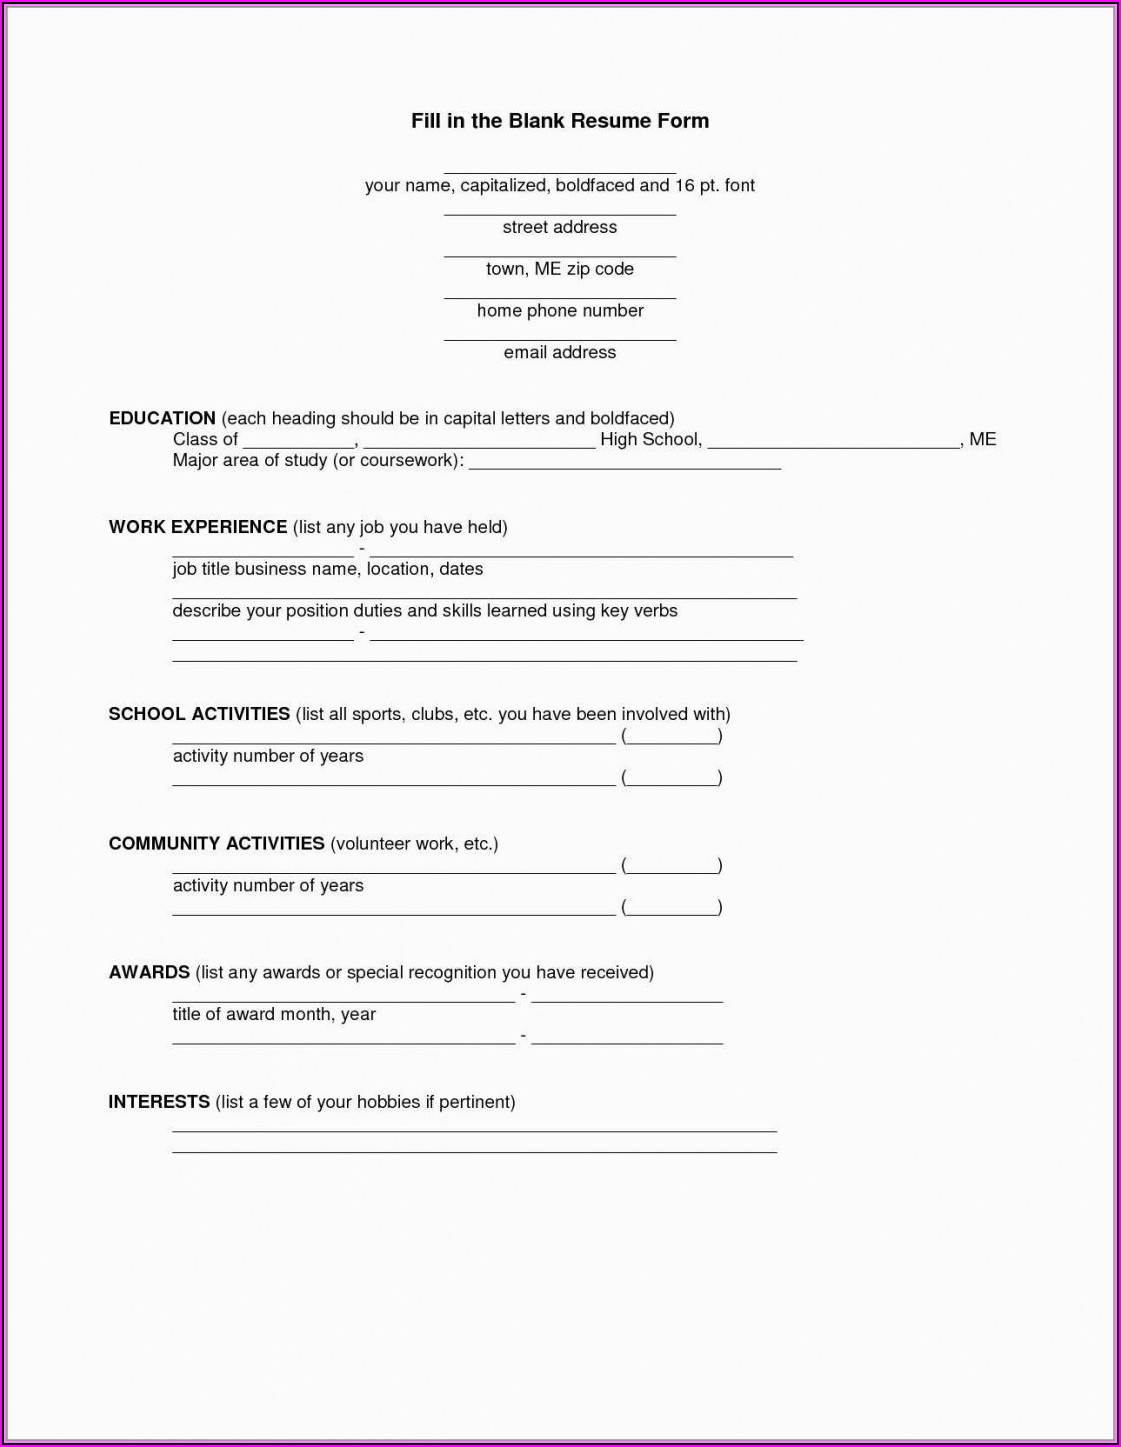 Resume Fill In The Blank Free